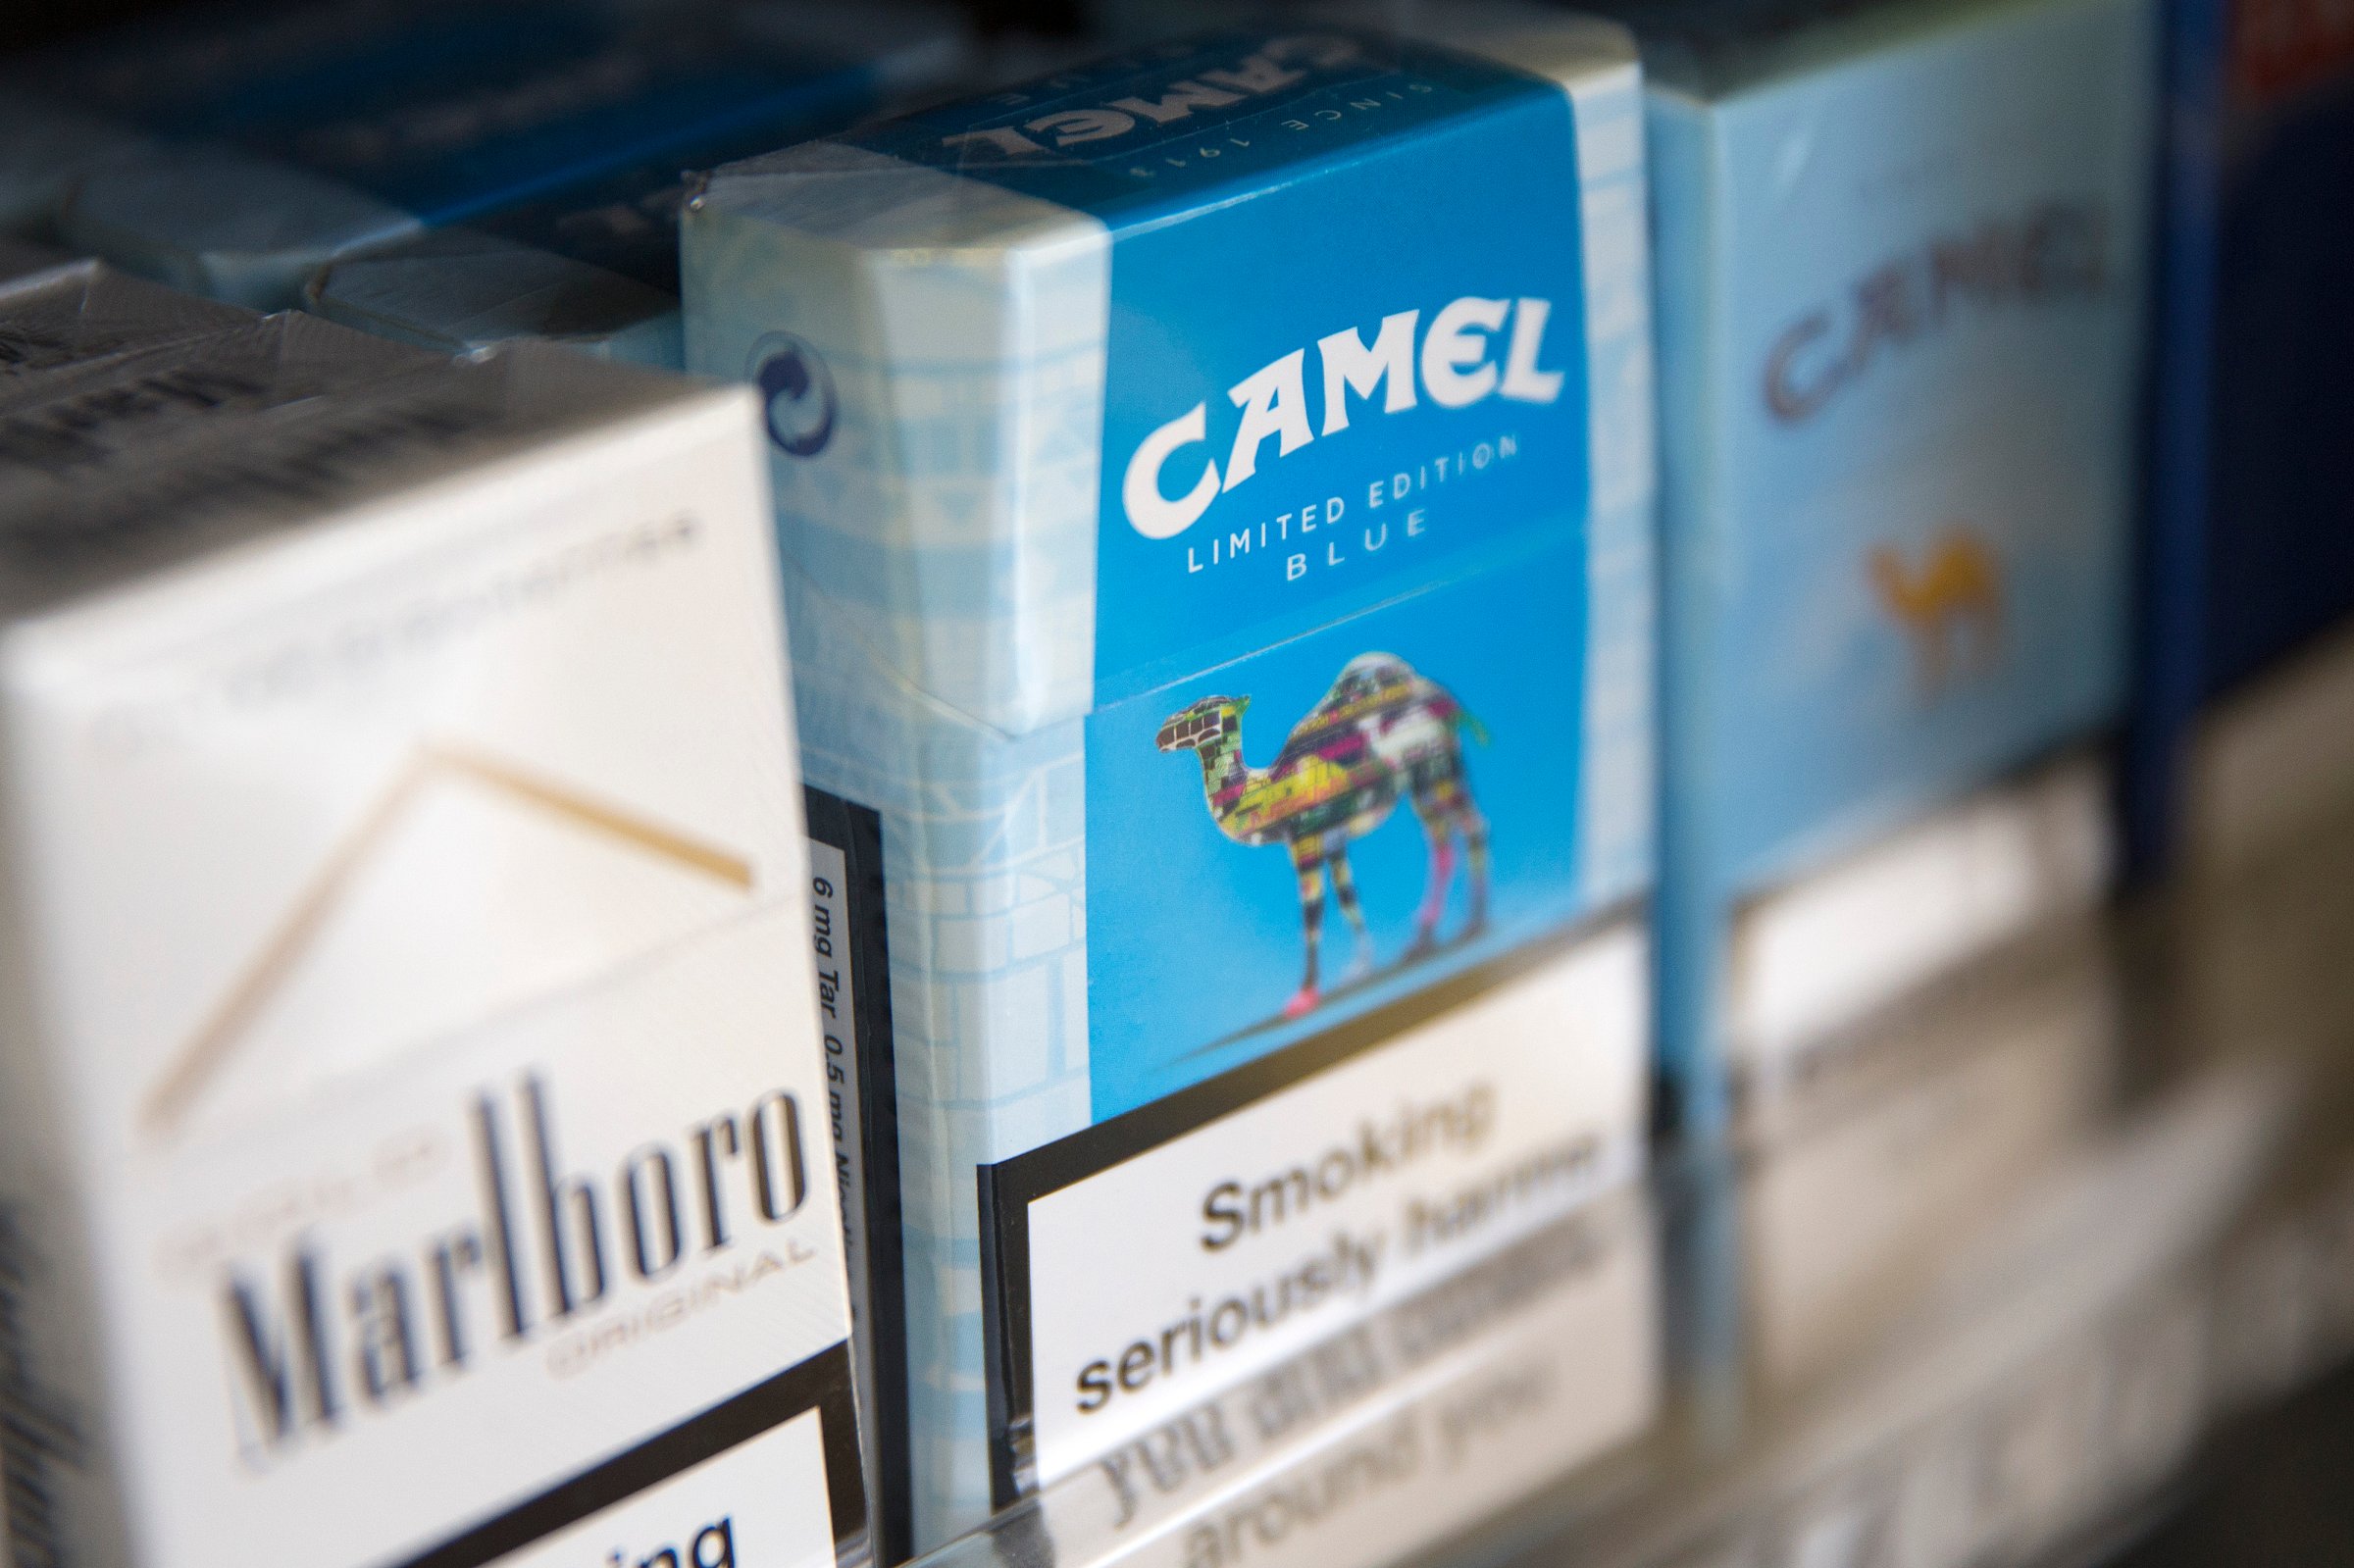 Cigarettes For Sale As Reynolds American Inc. Nears Deal To Buy Lorillard Inc.